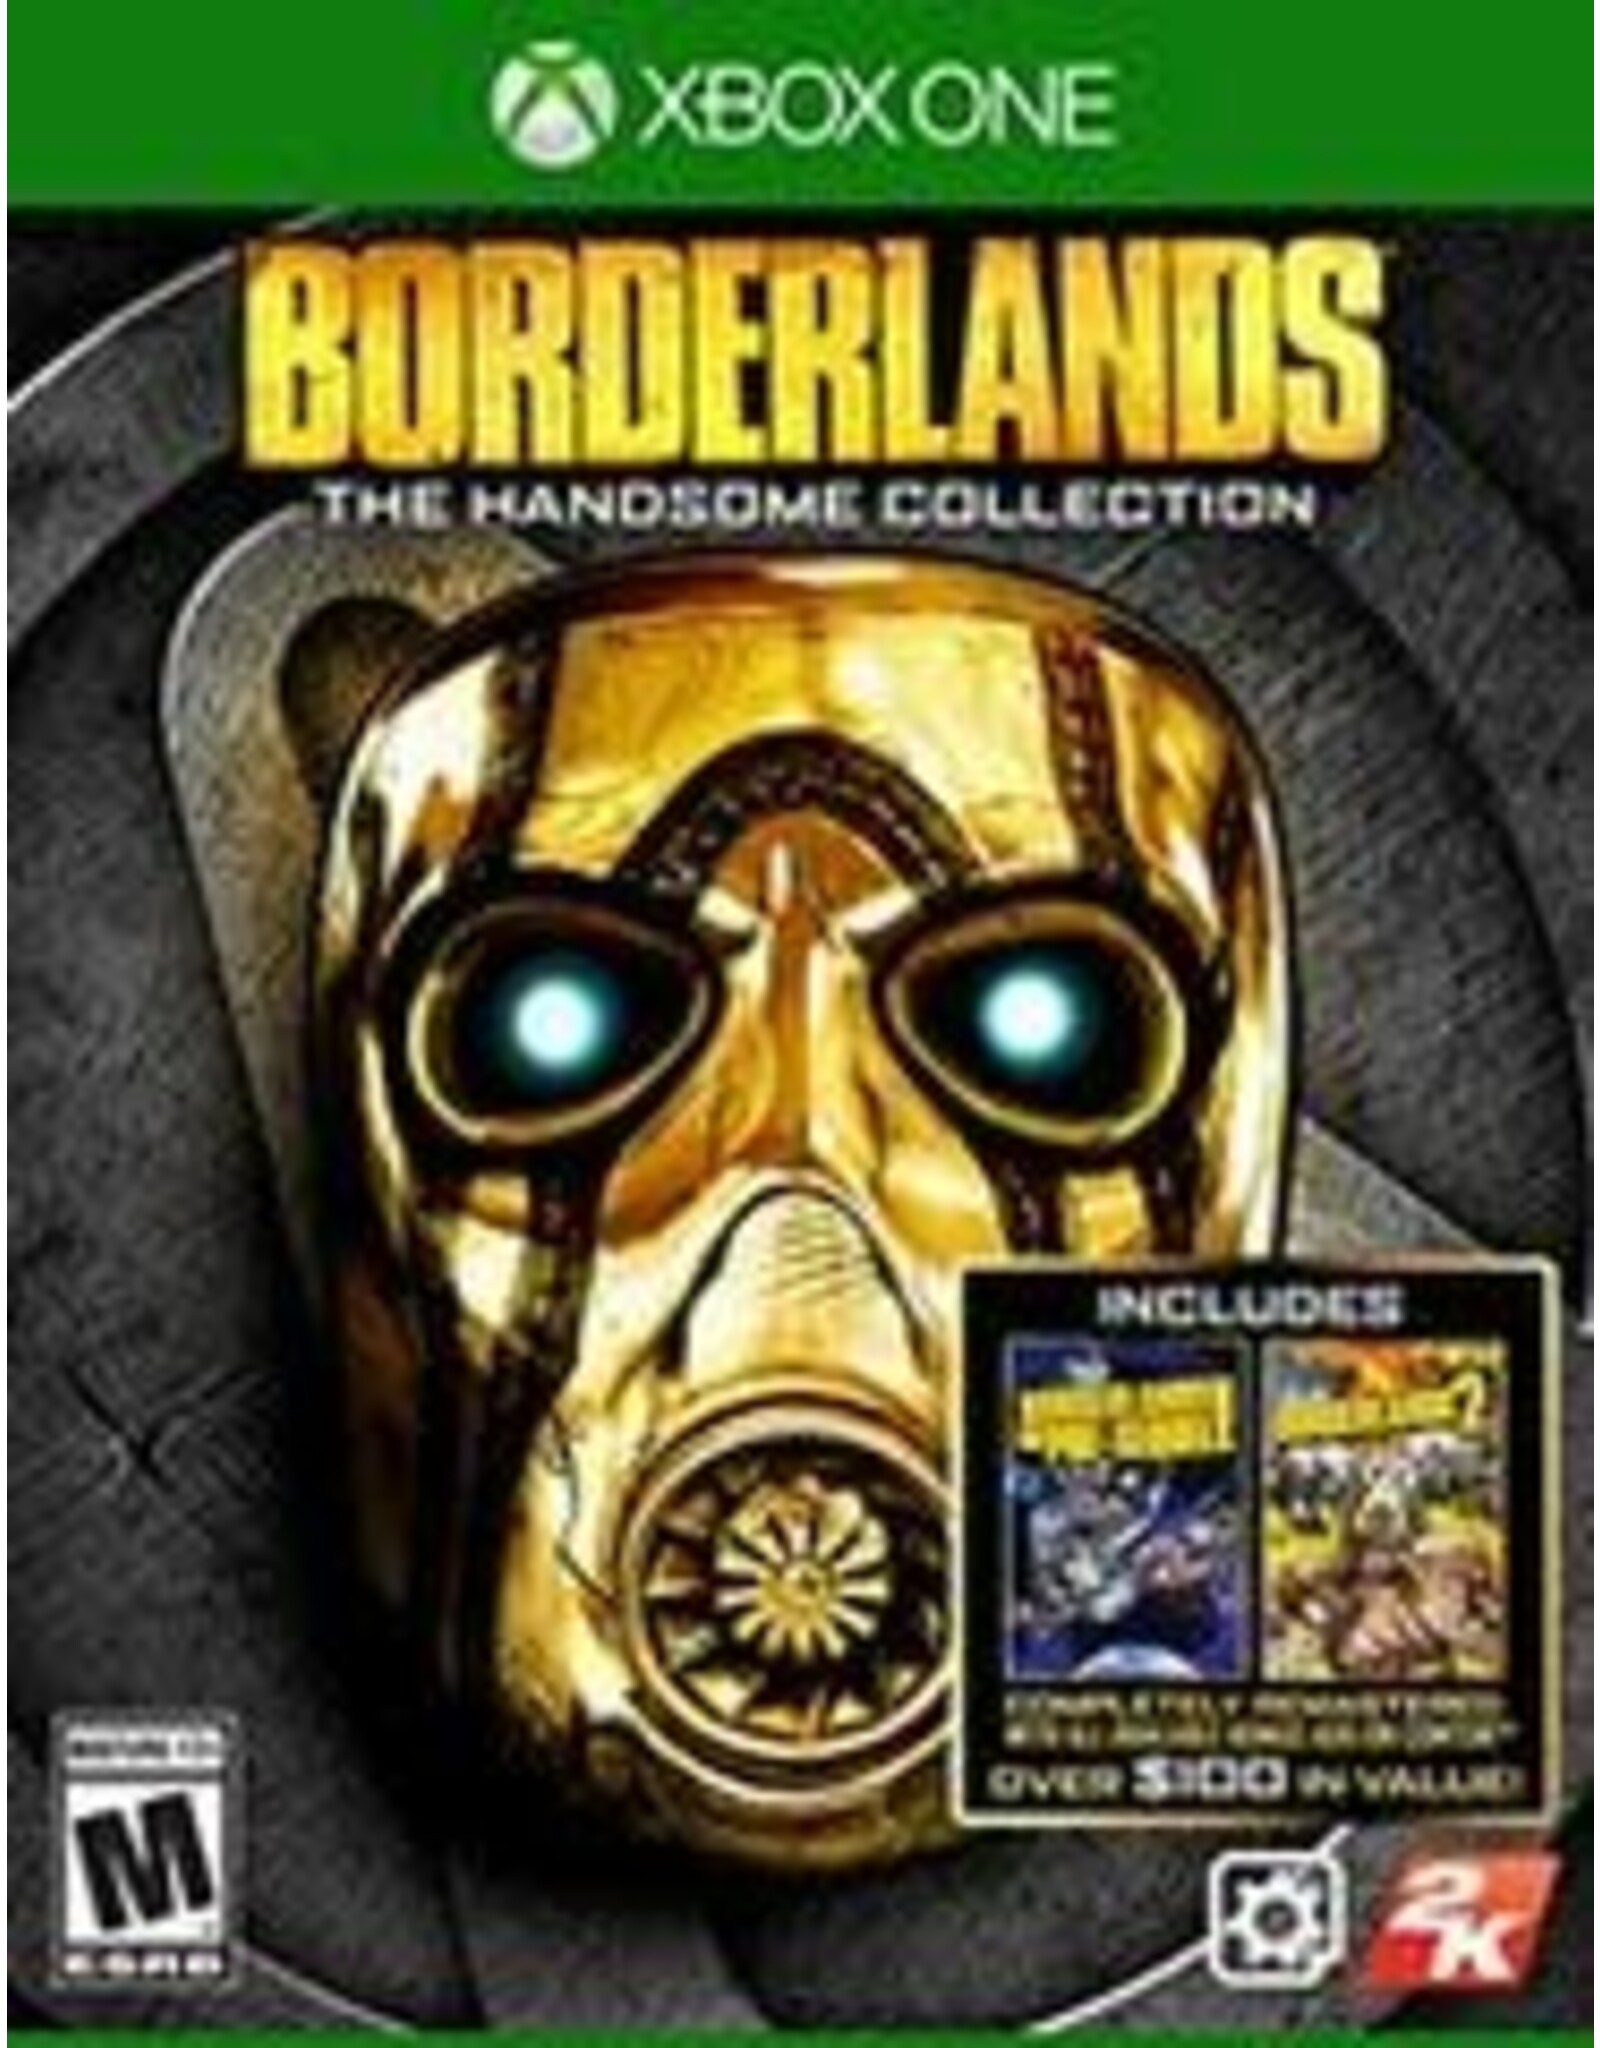 Xbox One Borderlands: The Handsome Collection (Used)